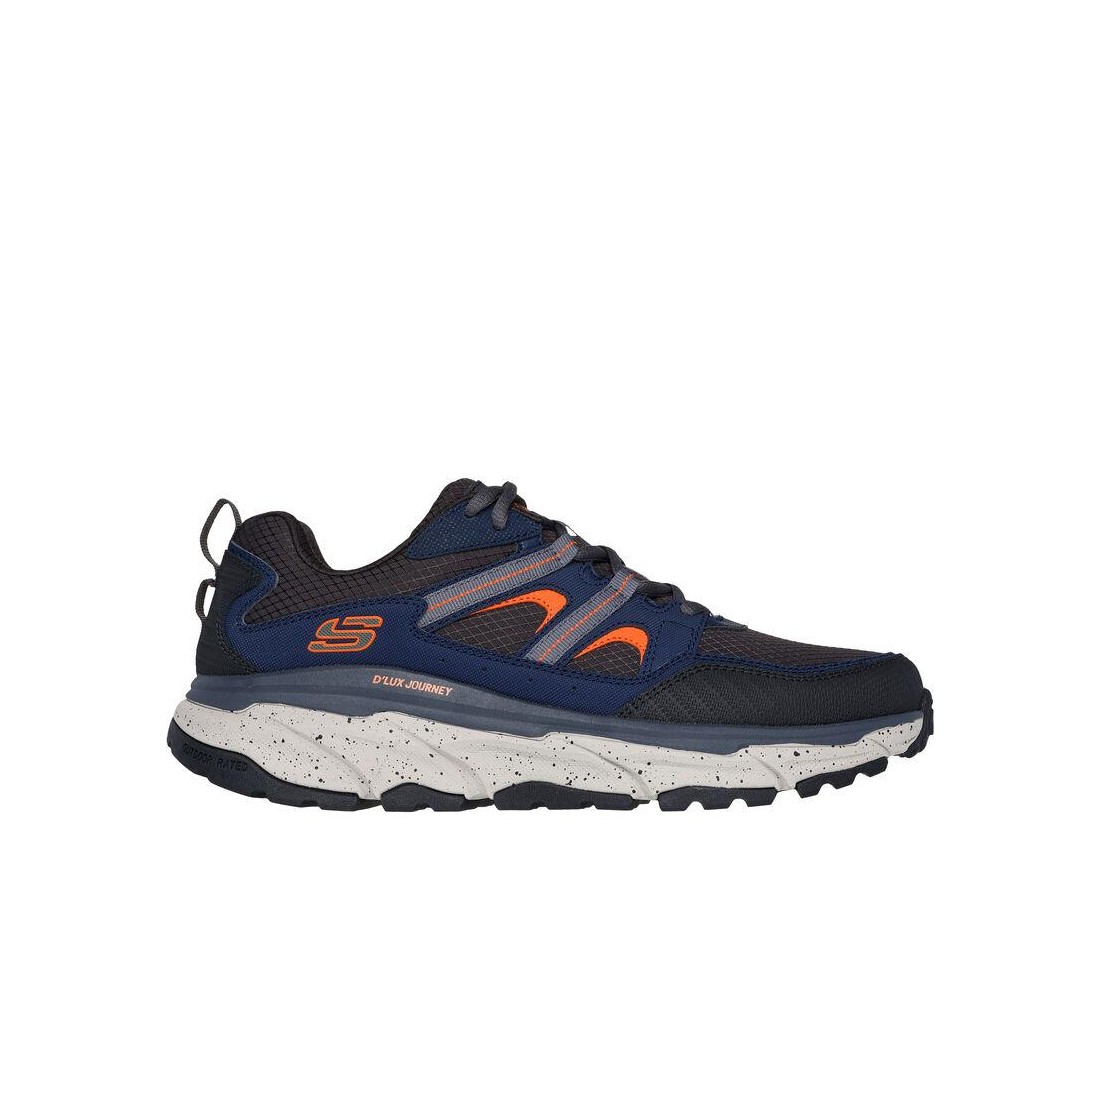 Giày Skechers Relaxed Fit: D'Lux Journey Nam Xanh Navy